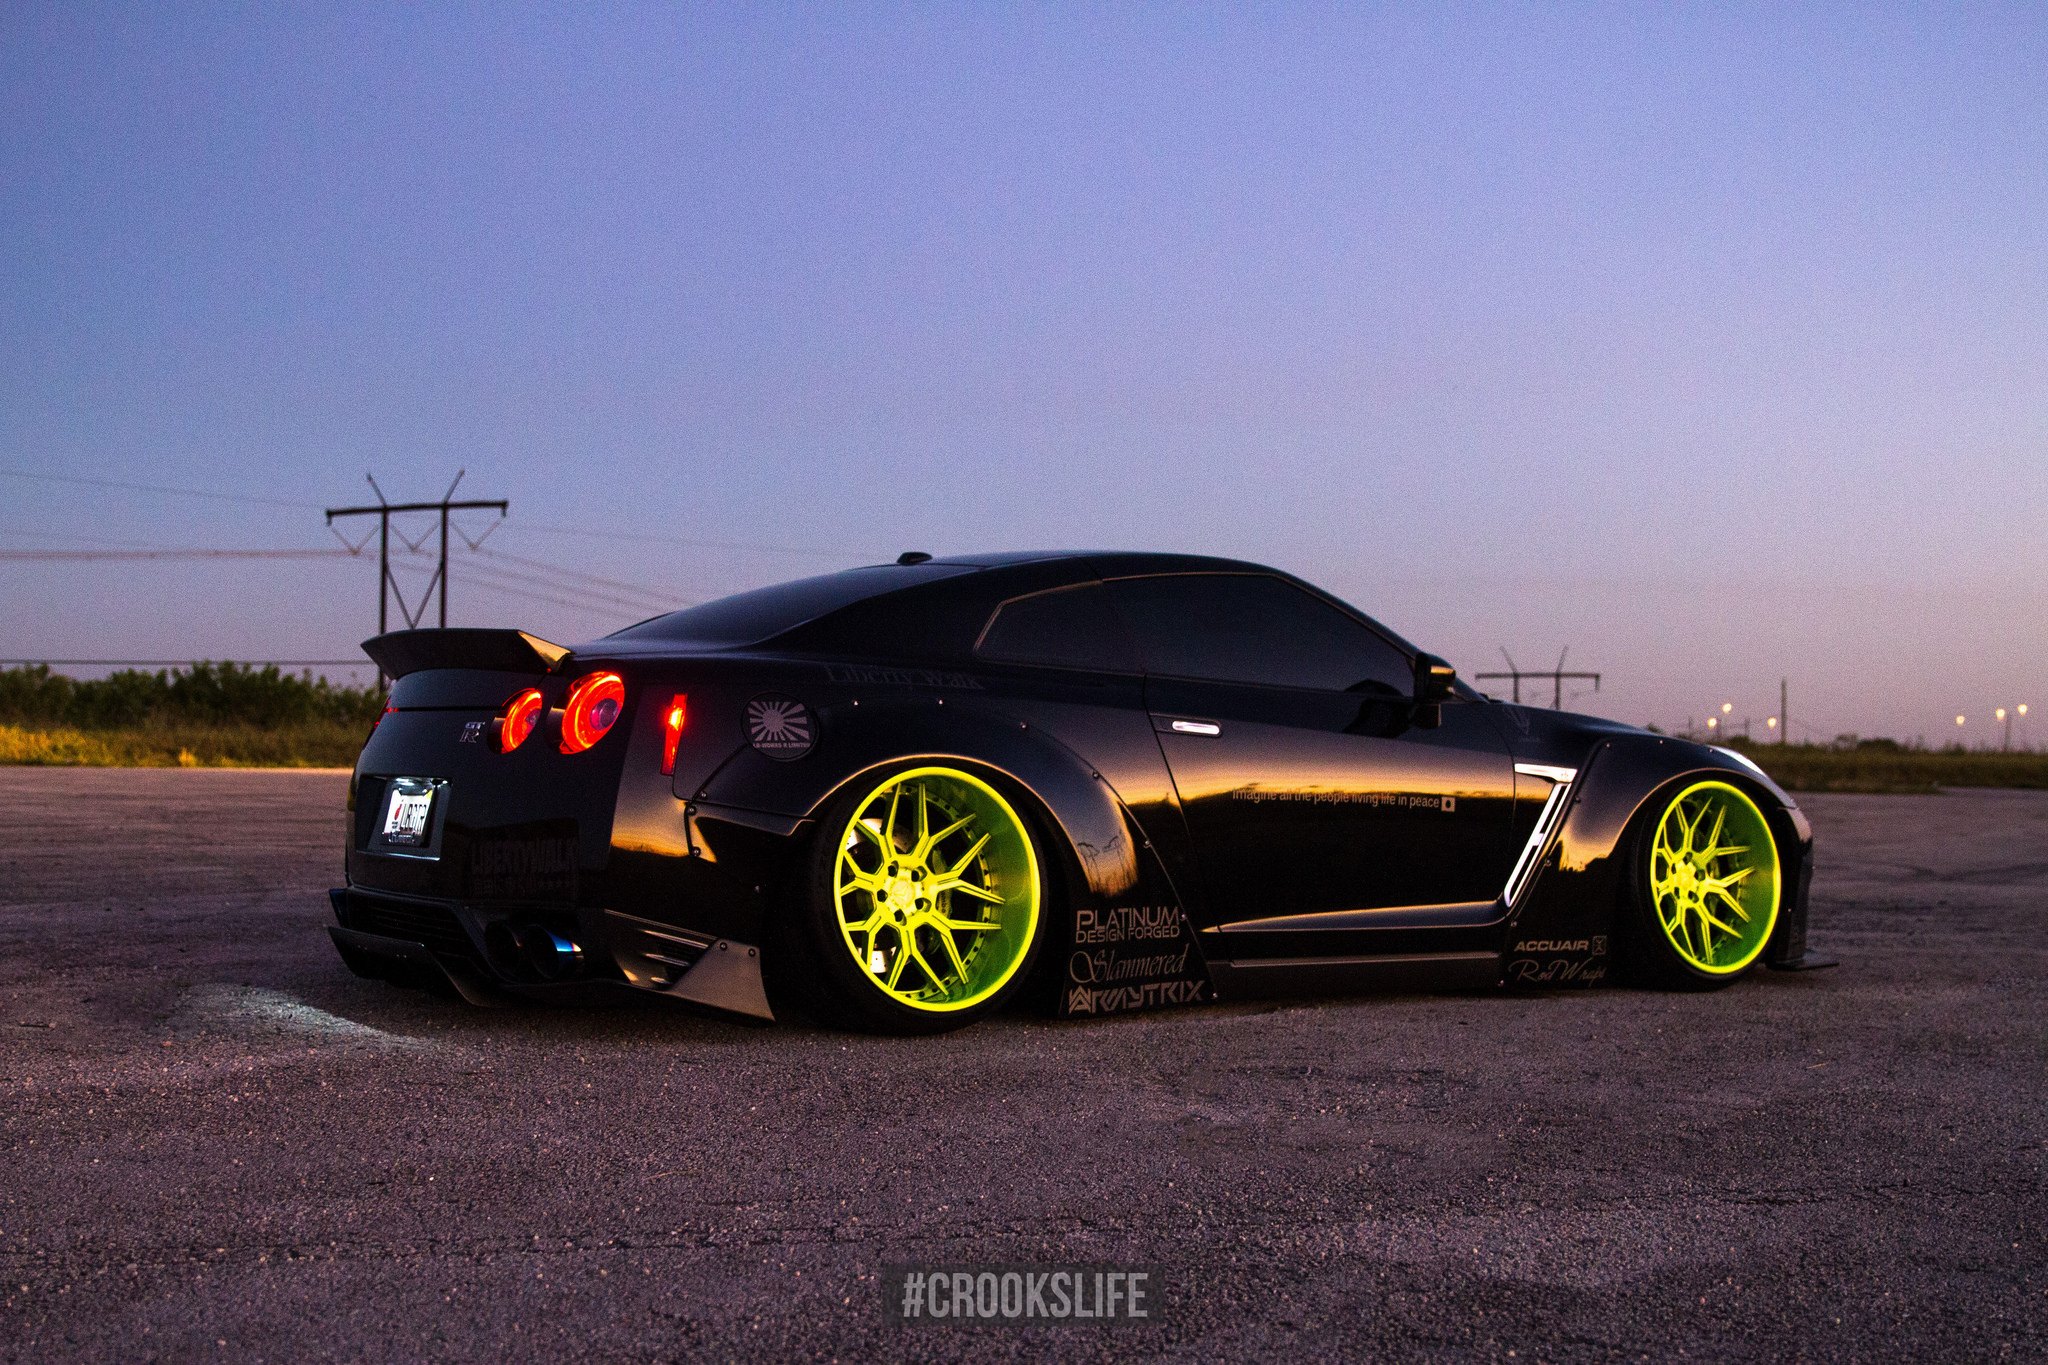 Black Nissan GT-R with Aftermarket Rear Spoiler - Photo by Jimmy Crook